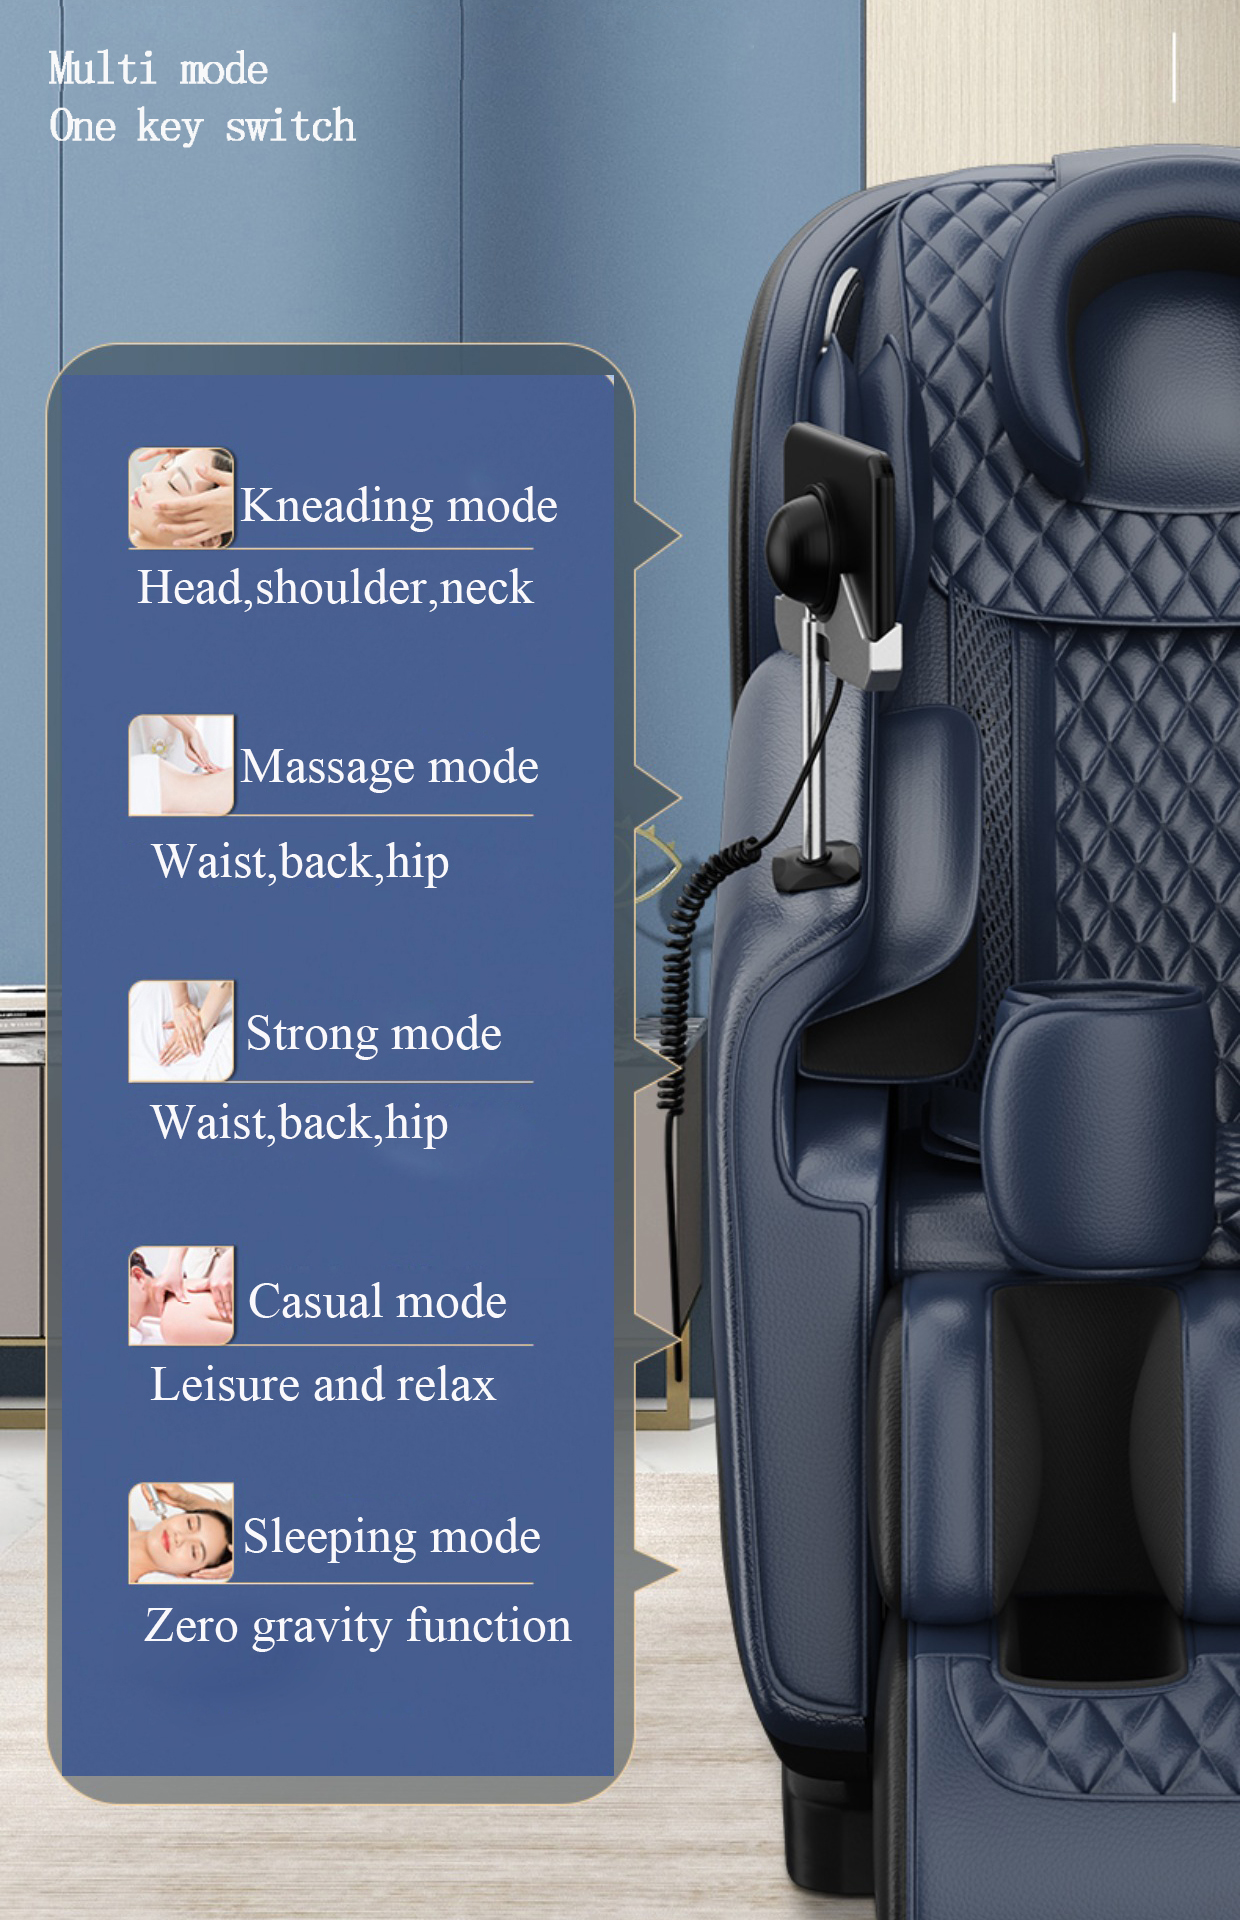 Luxury Massage Chair with free Led TV and Trolley Speaker Pre booking offer only Book Now and get Free Speaker